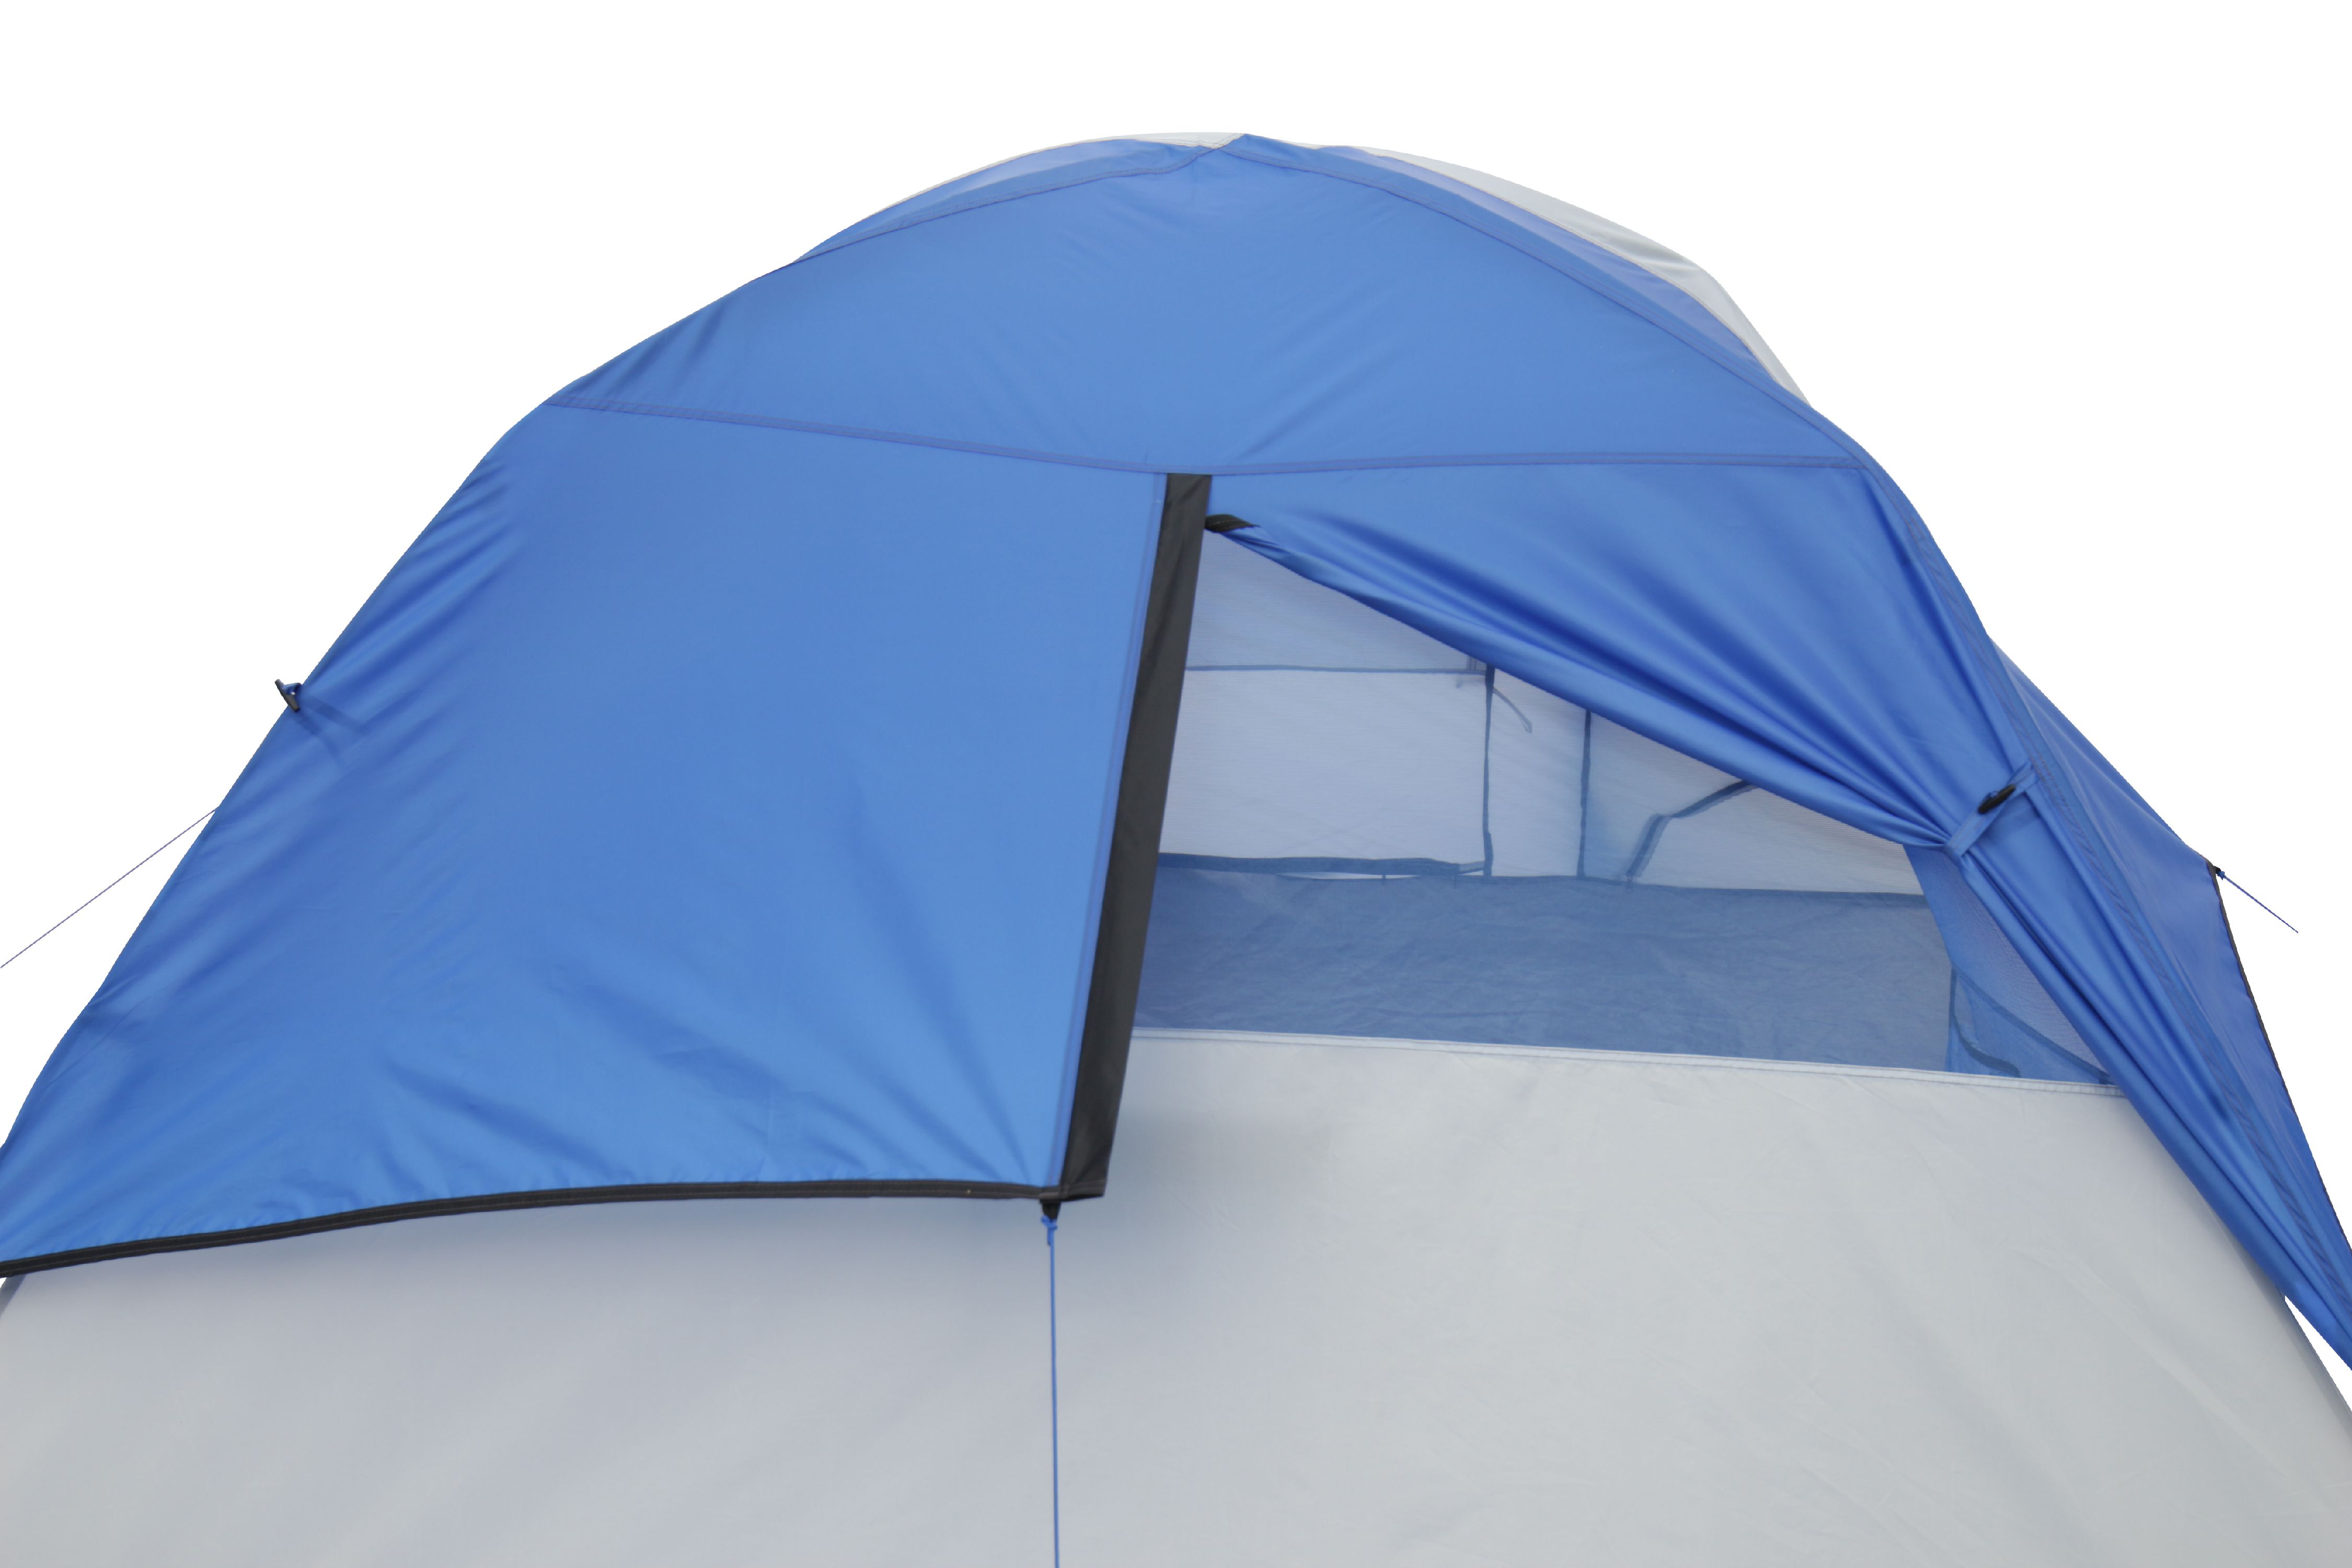 Ozark Trail 4 Person Outdoor Camping Dome Tent - image 4 of 14